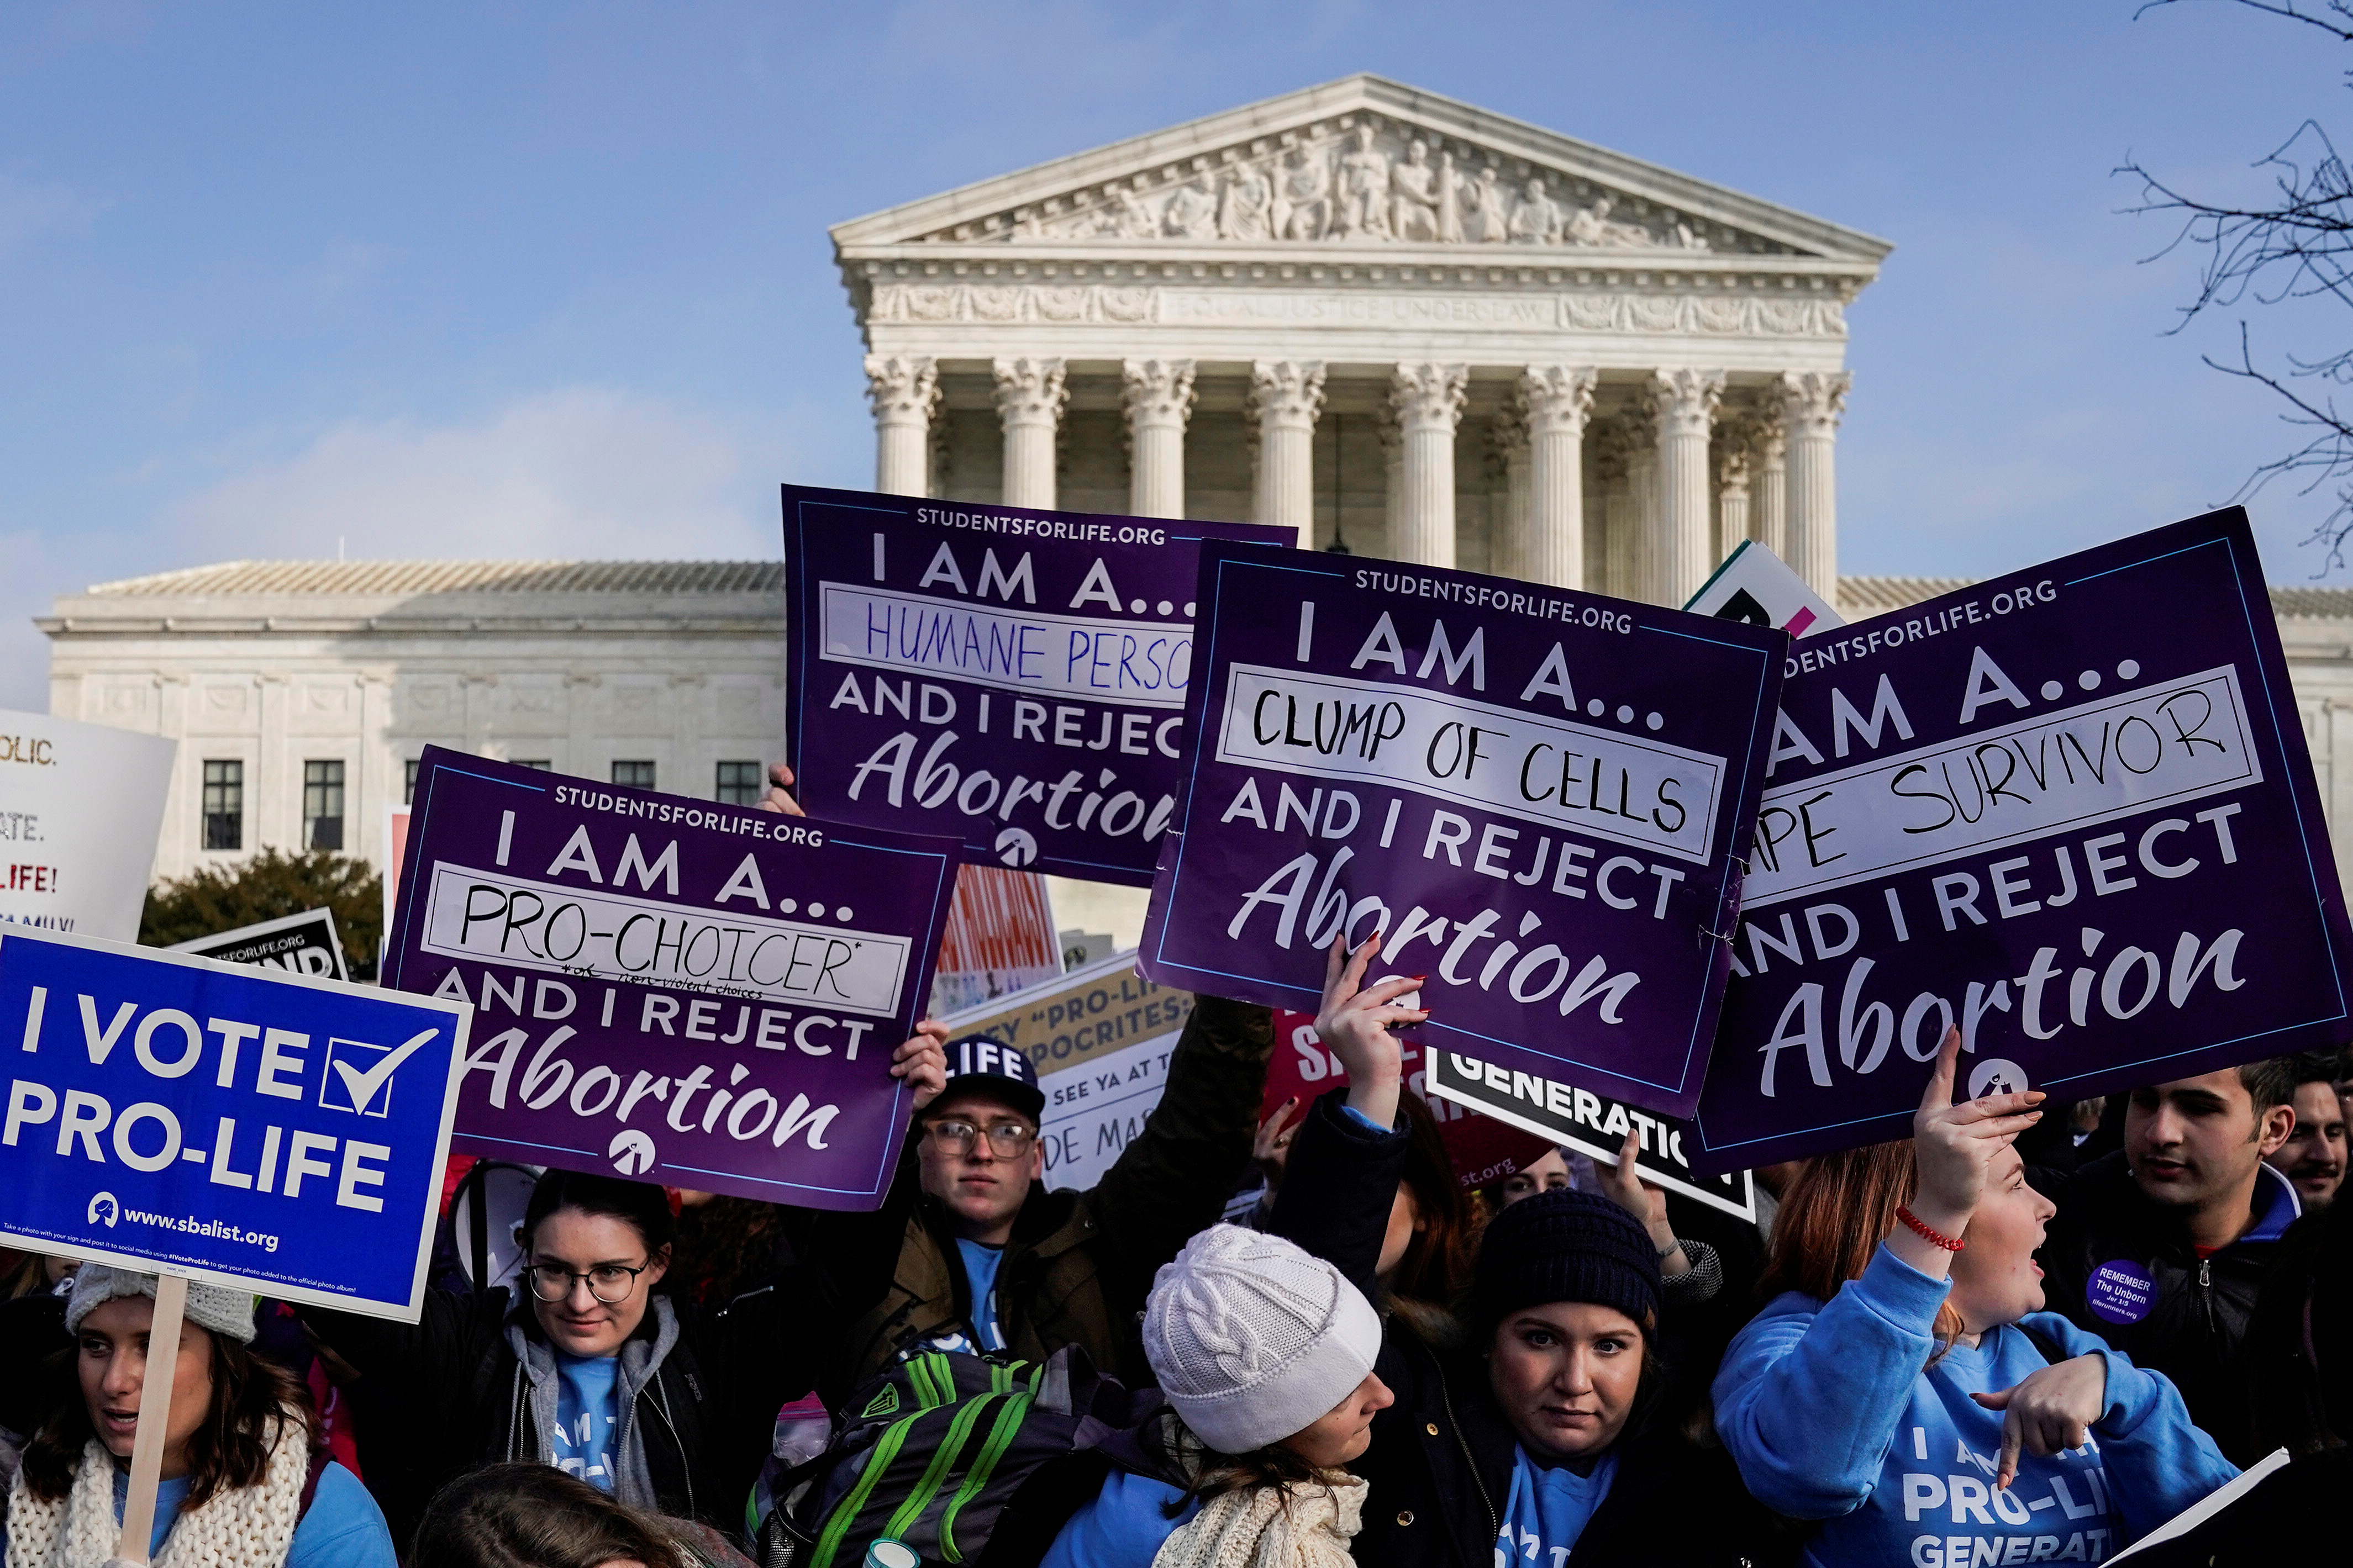 Pro-life marchers rally at the Supreme Court during the 46th annual March for Life in Washington, U.S., January 18, 2019. REUTERS/Joshua Roberts